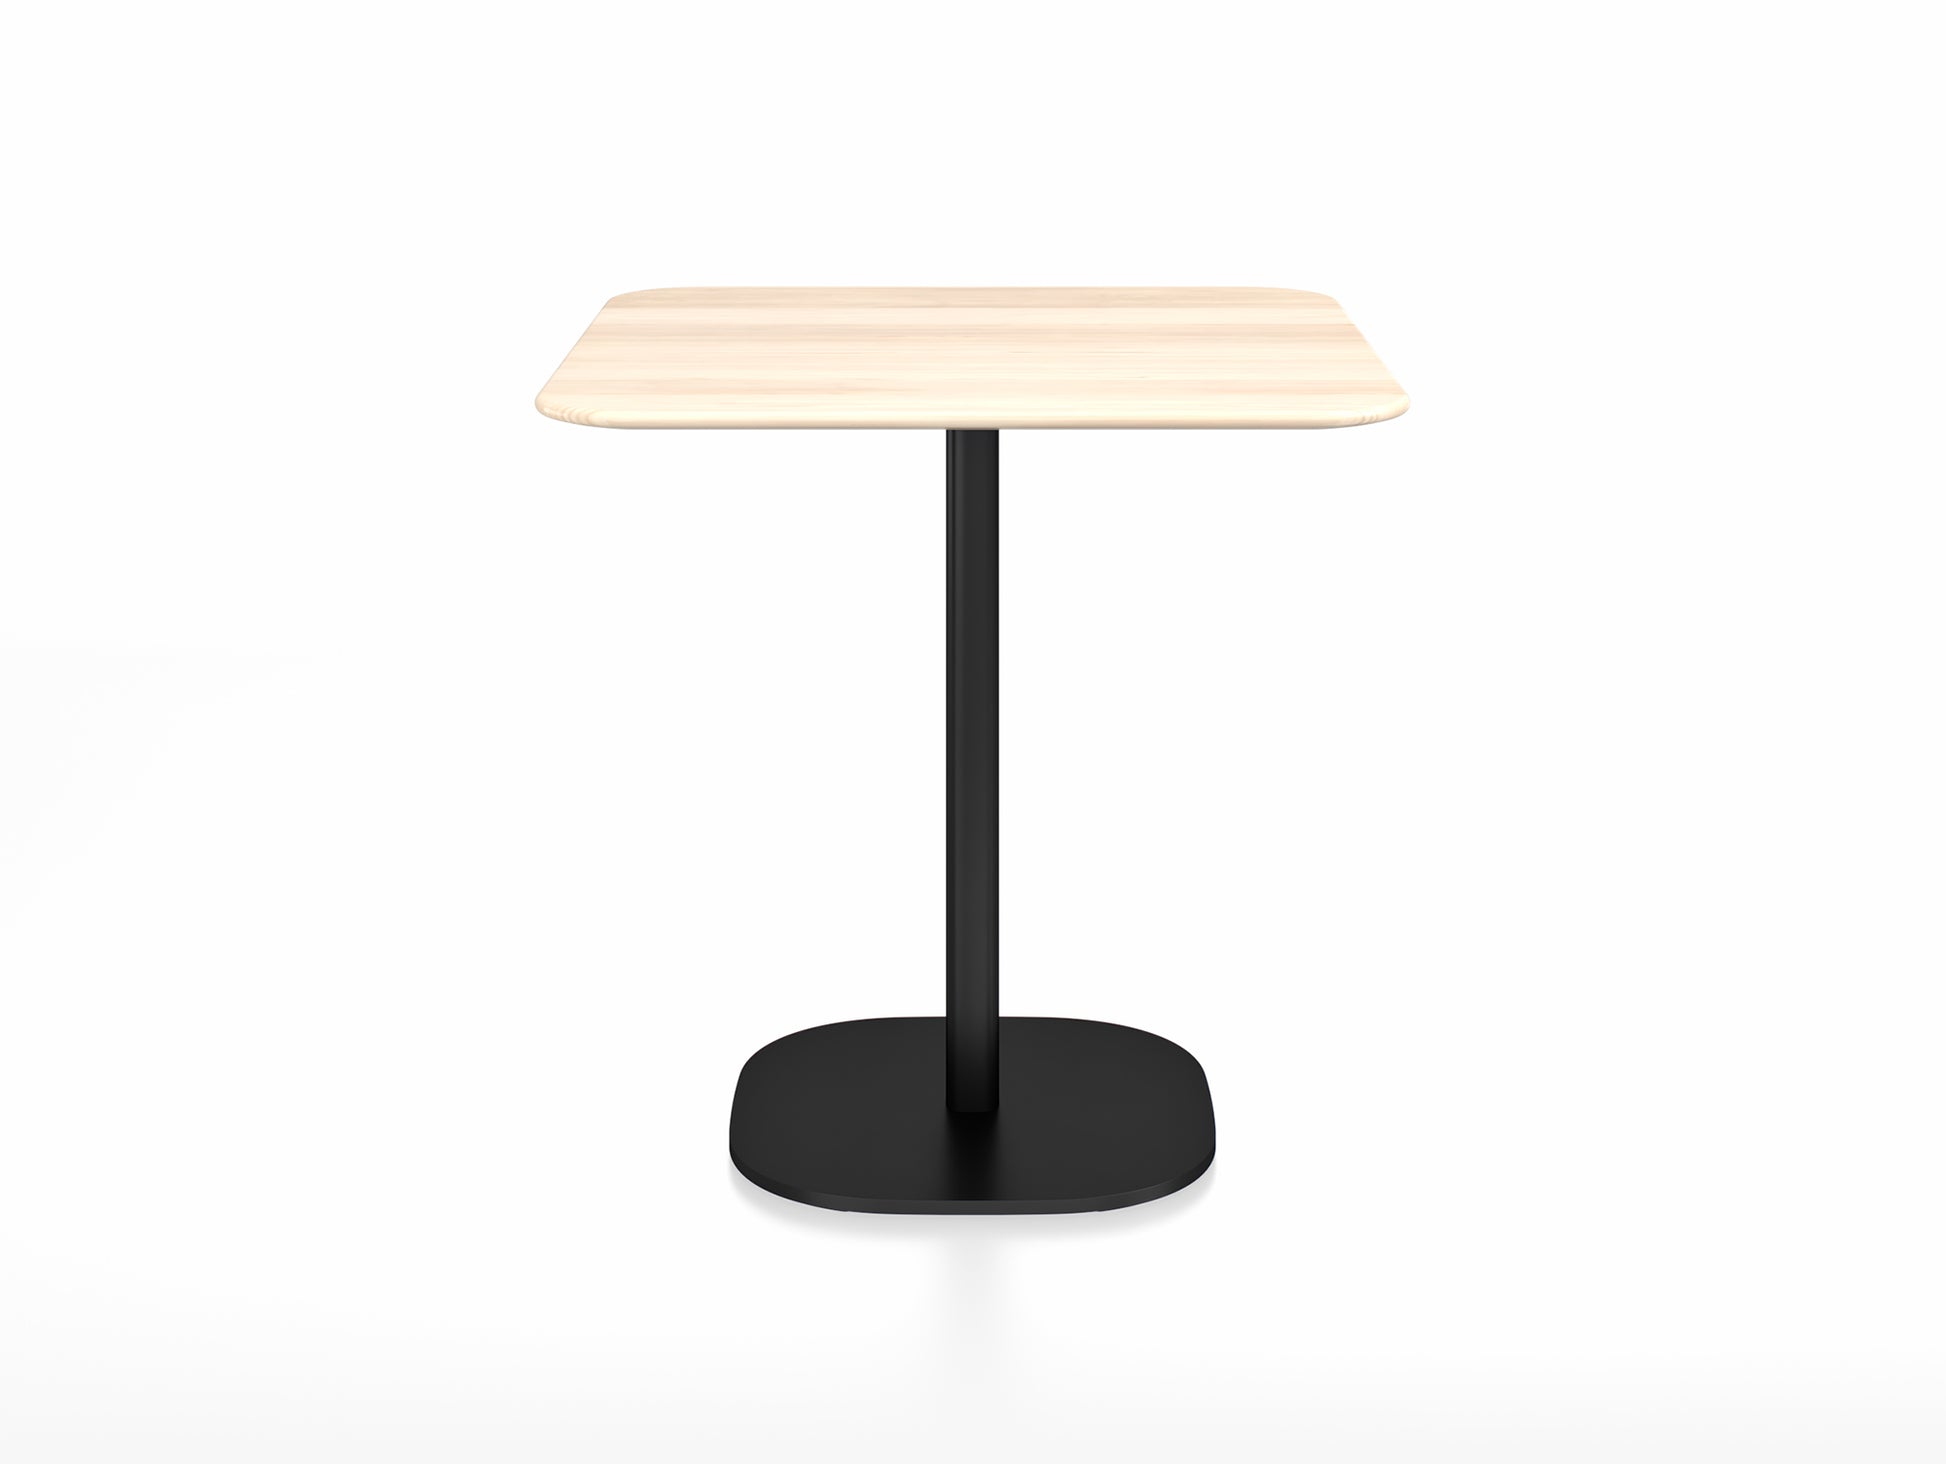 2 Inch Outdoor Cafe Table - Flat Base by Emeco - 76x76cm 